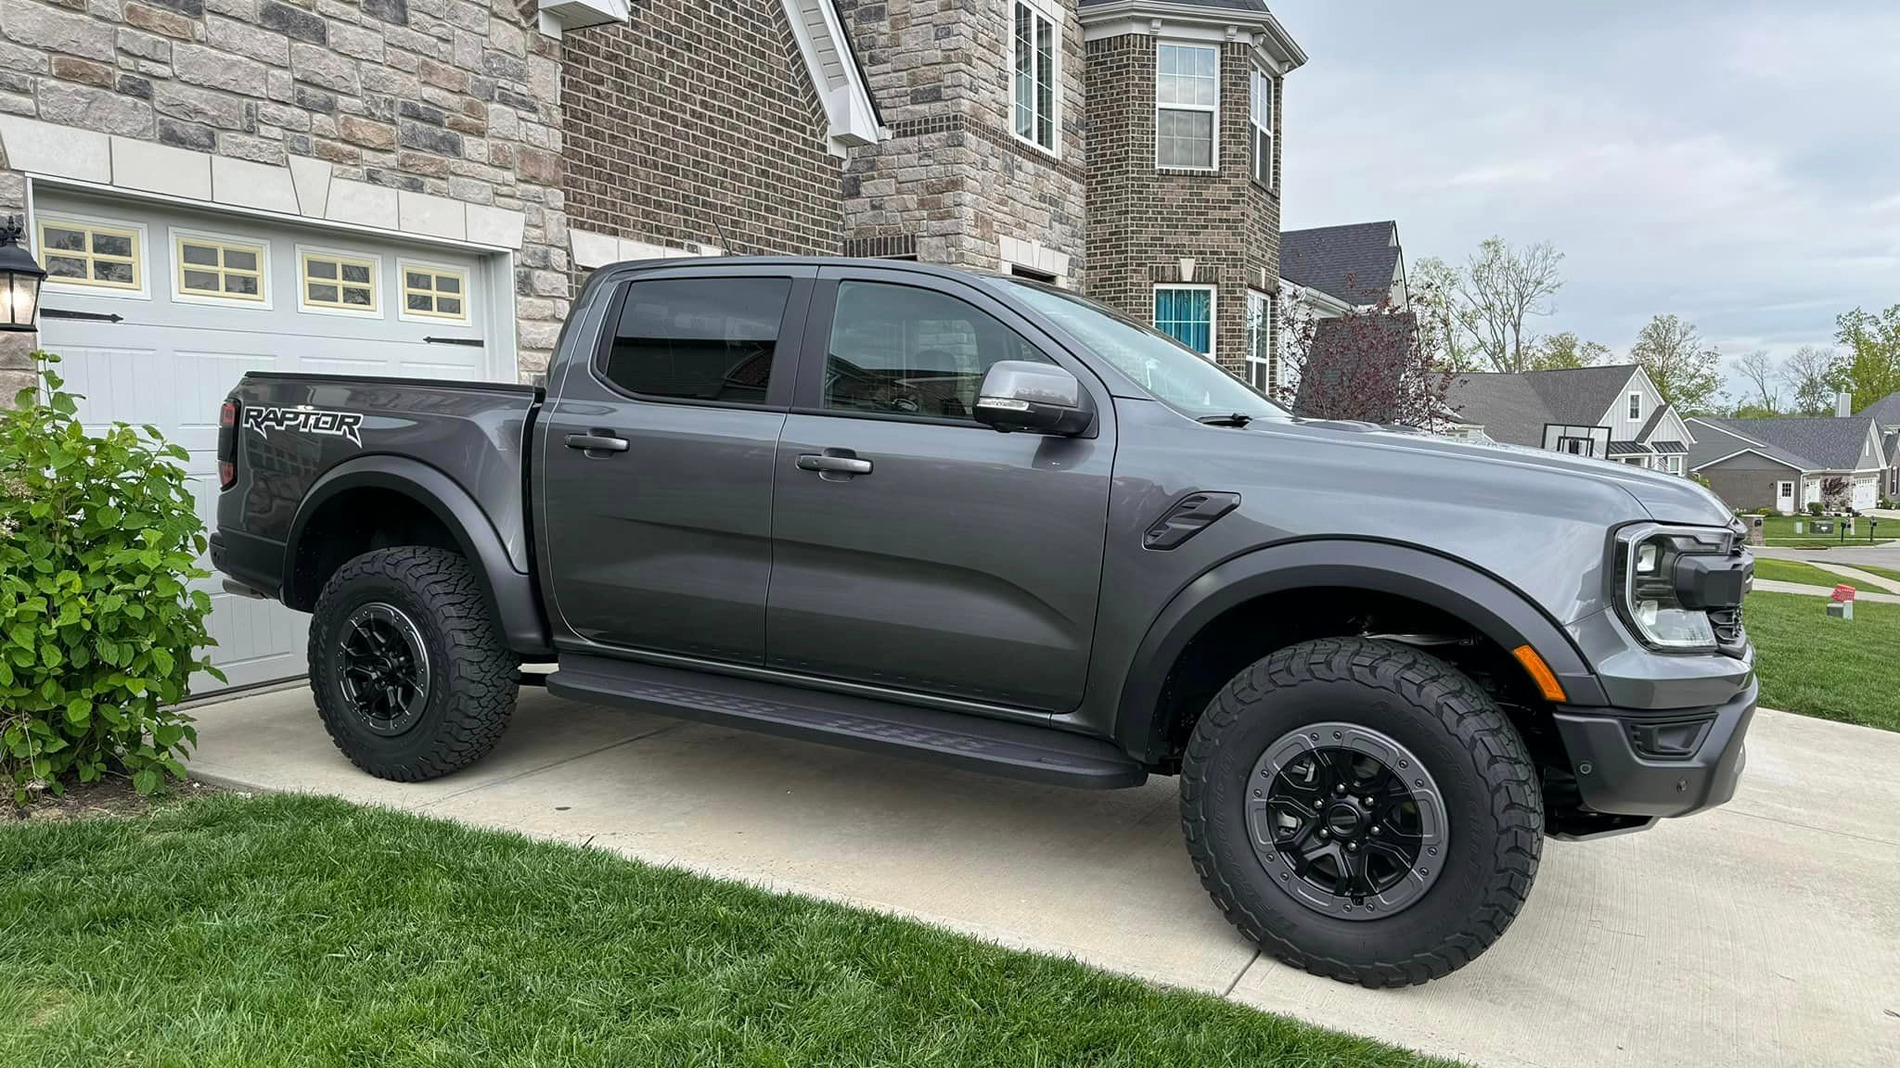 Ford Ranger Picked up my Baby Raptor (No Pre-Order, Paid MSRP, bought in Kentucky 26APR) 438255074_10106877276230484_9153971840277381038_n